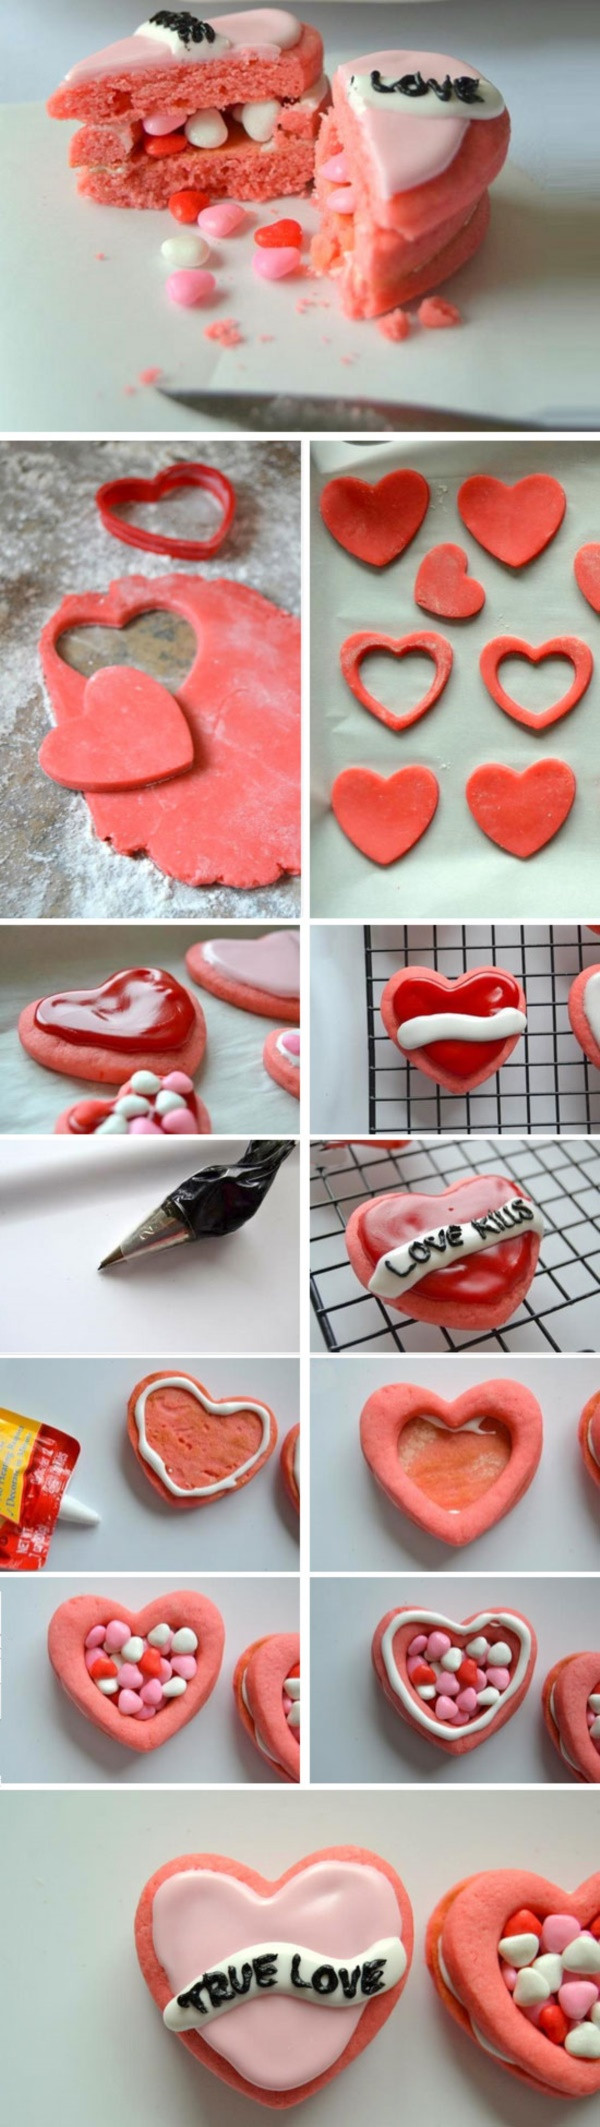 Valentines Day Ideas For Him Homemade
 101 Homemade Valentines Day Ideas for Him that re really CUTE